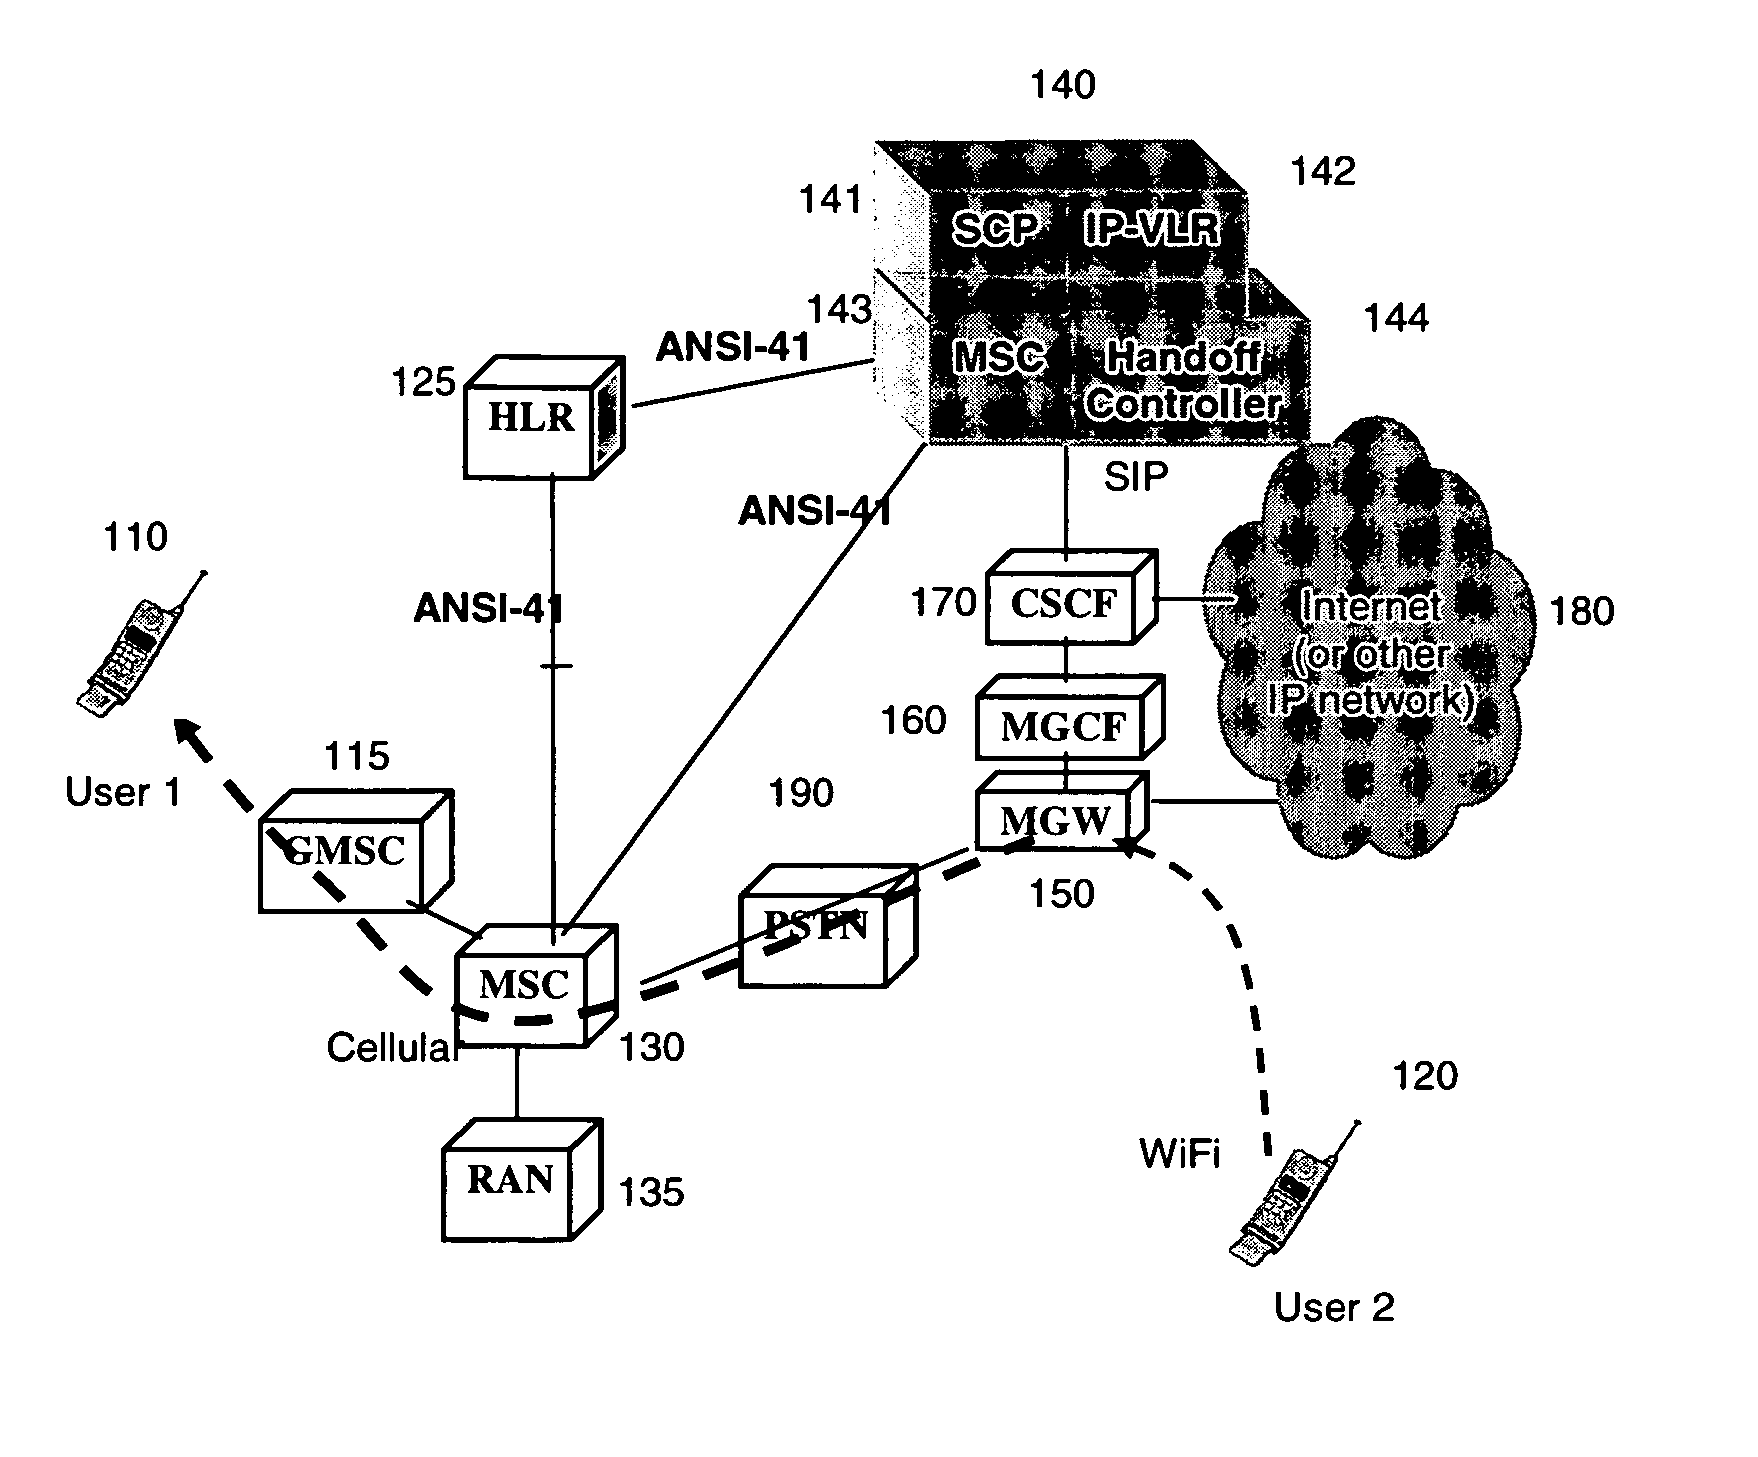 Seamless handoff across heterogeneous access networks using a handoff controller in a service control point